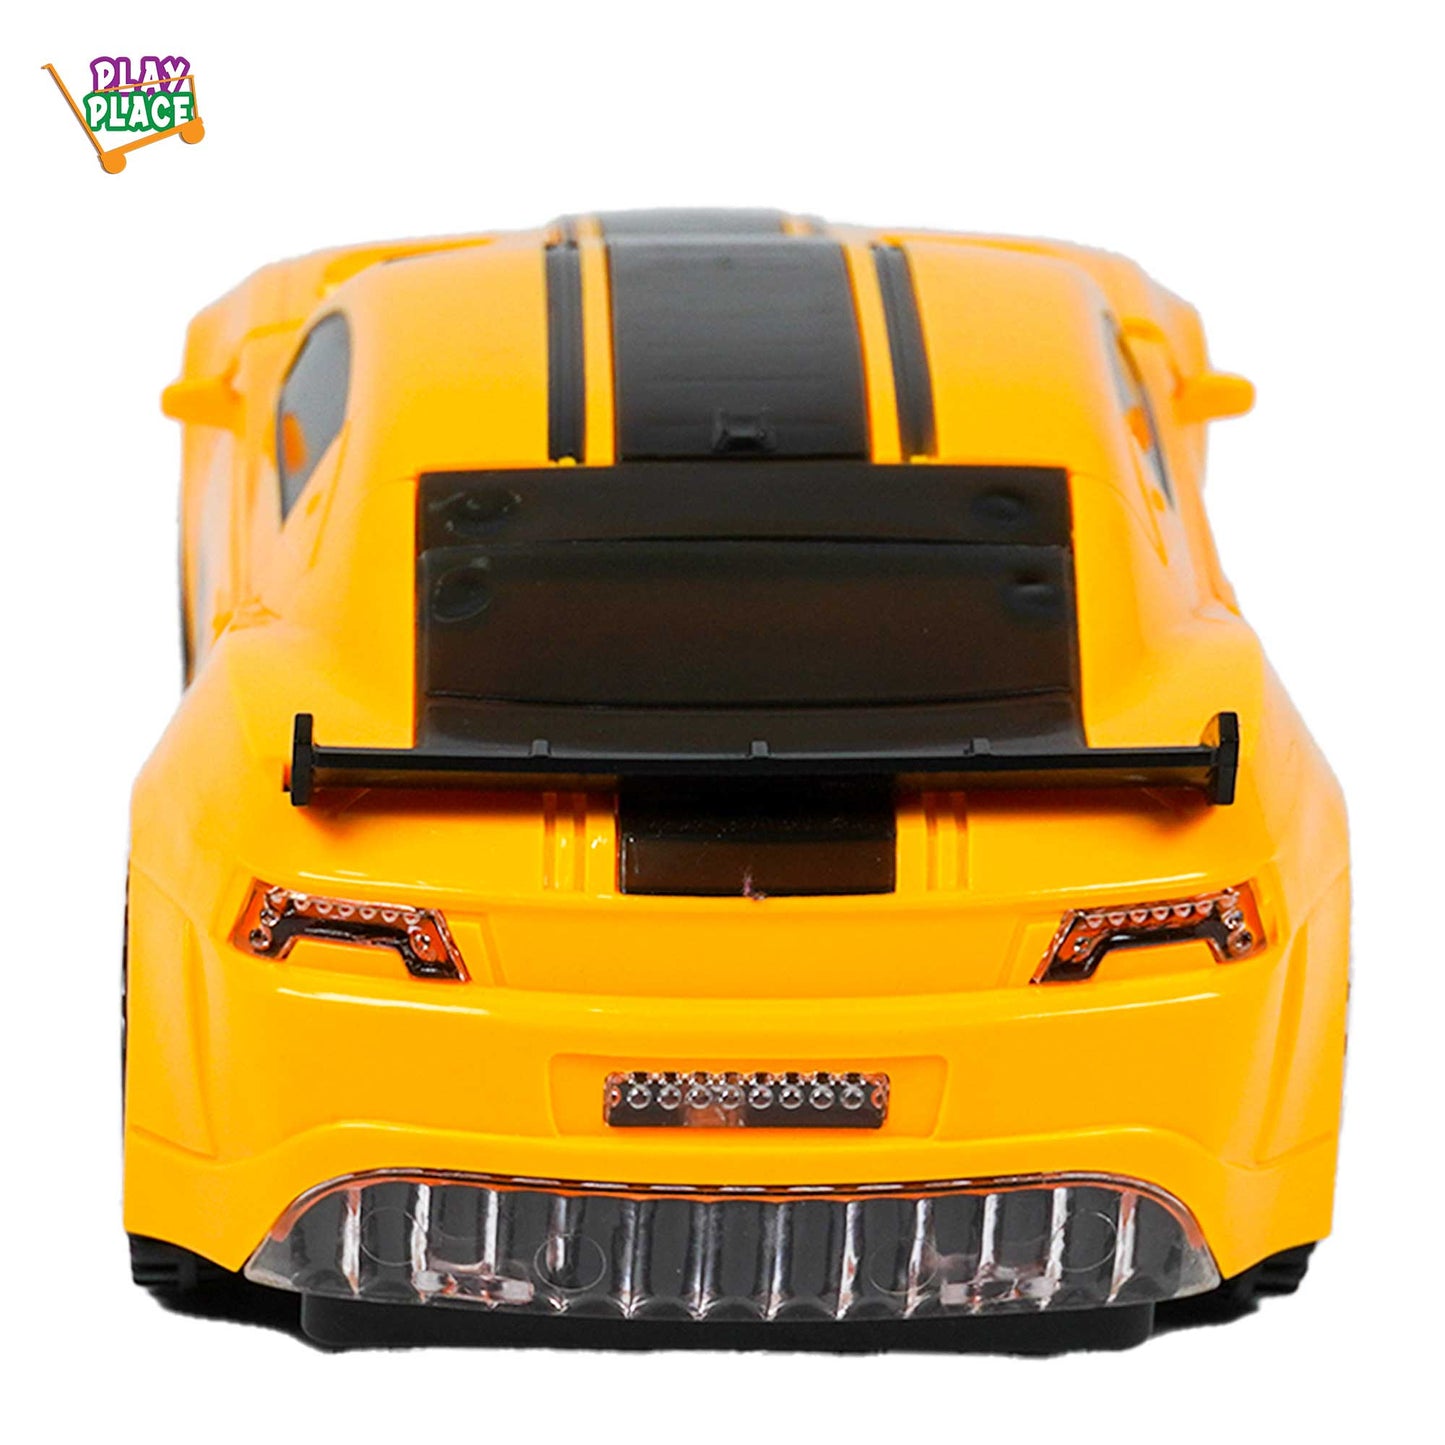 Transformers - Robot to Car Bumble Bee Toy!